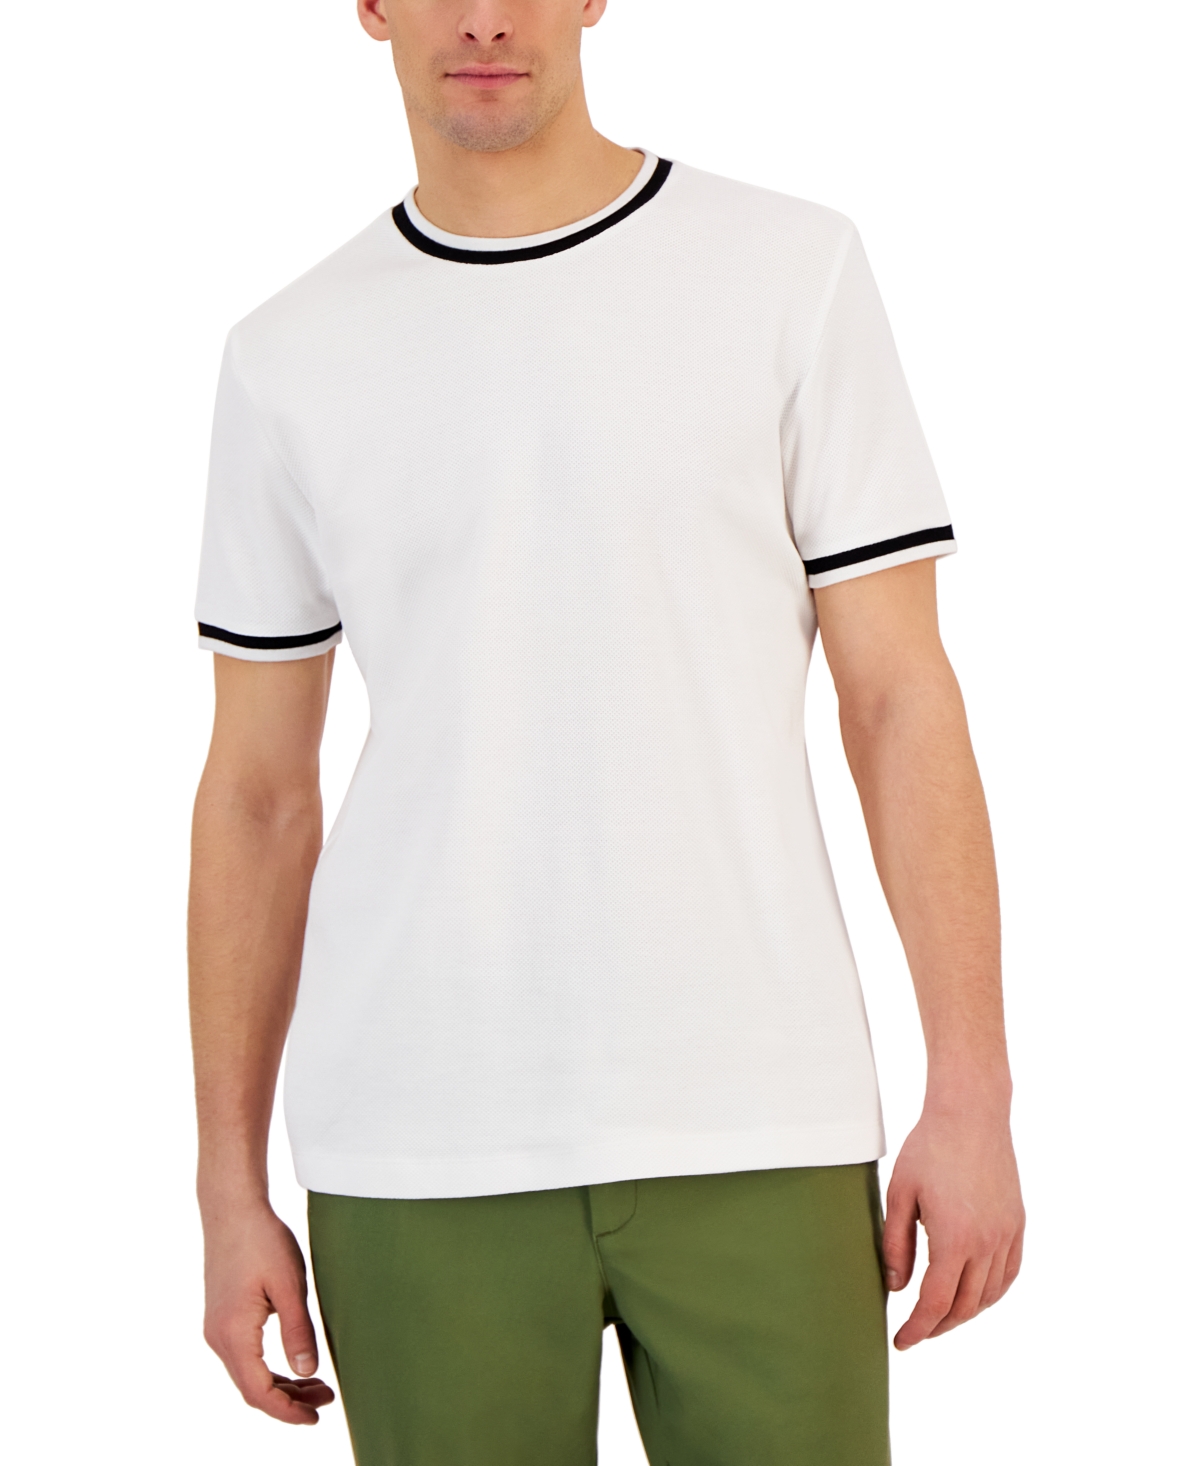 ALFANI MEN'S TIPPED TEXTURED PIQUE T-SHIRT, CREATED FOR MACY'S